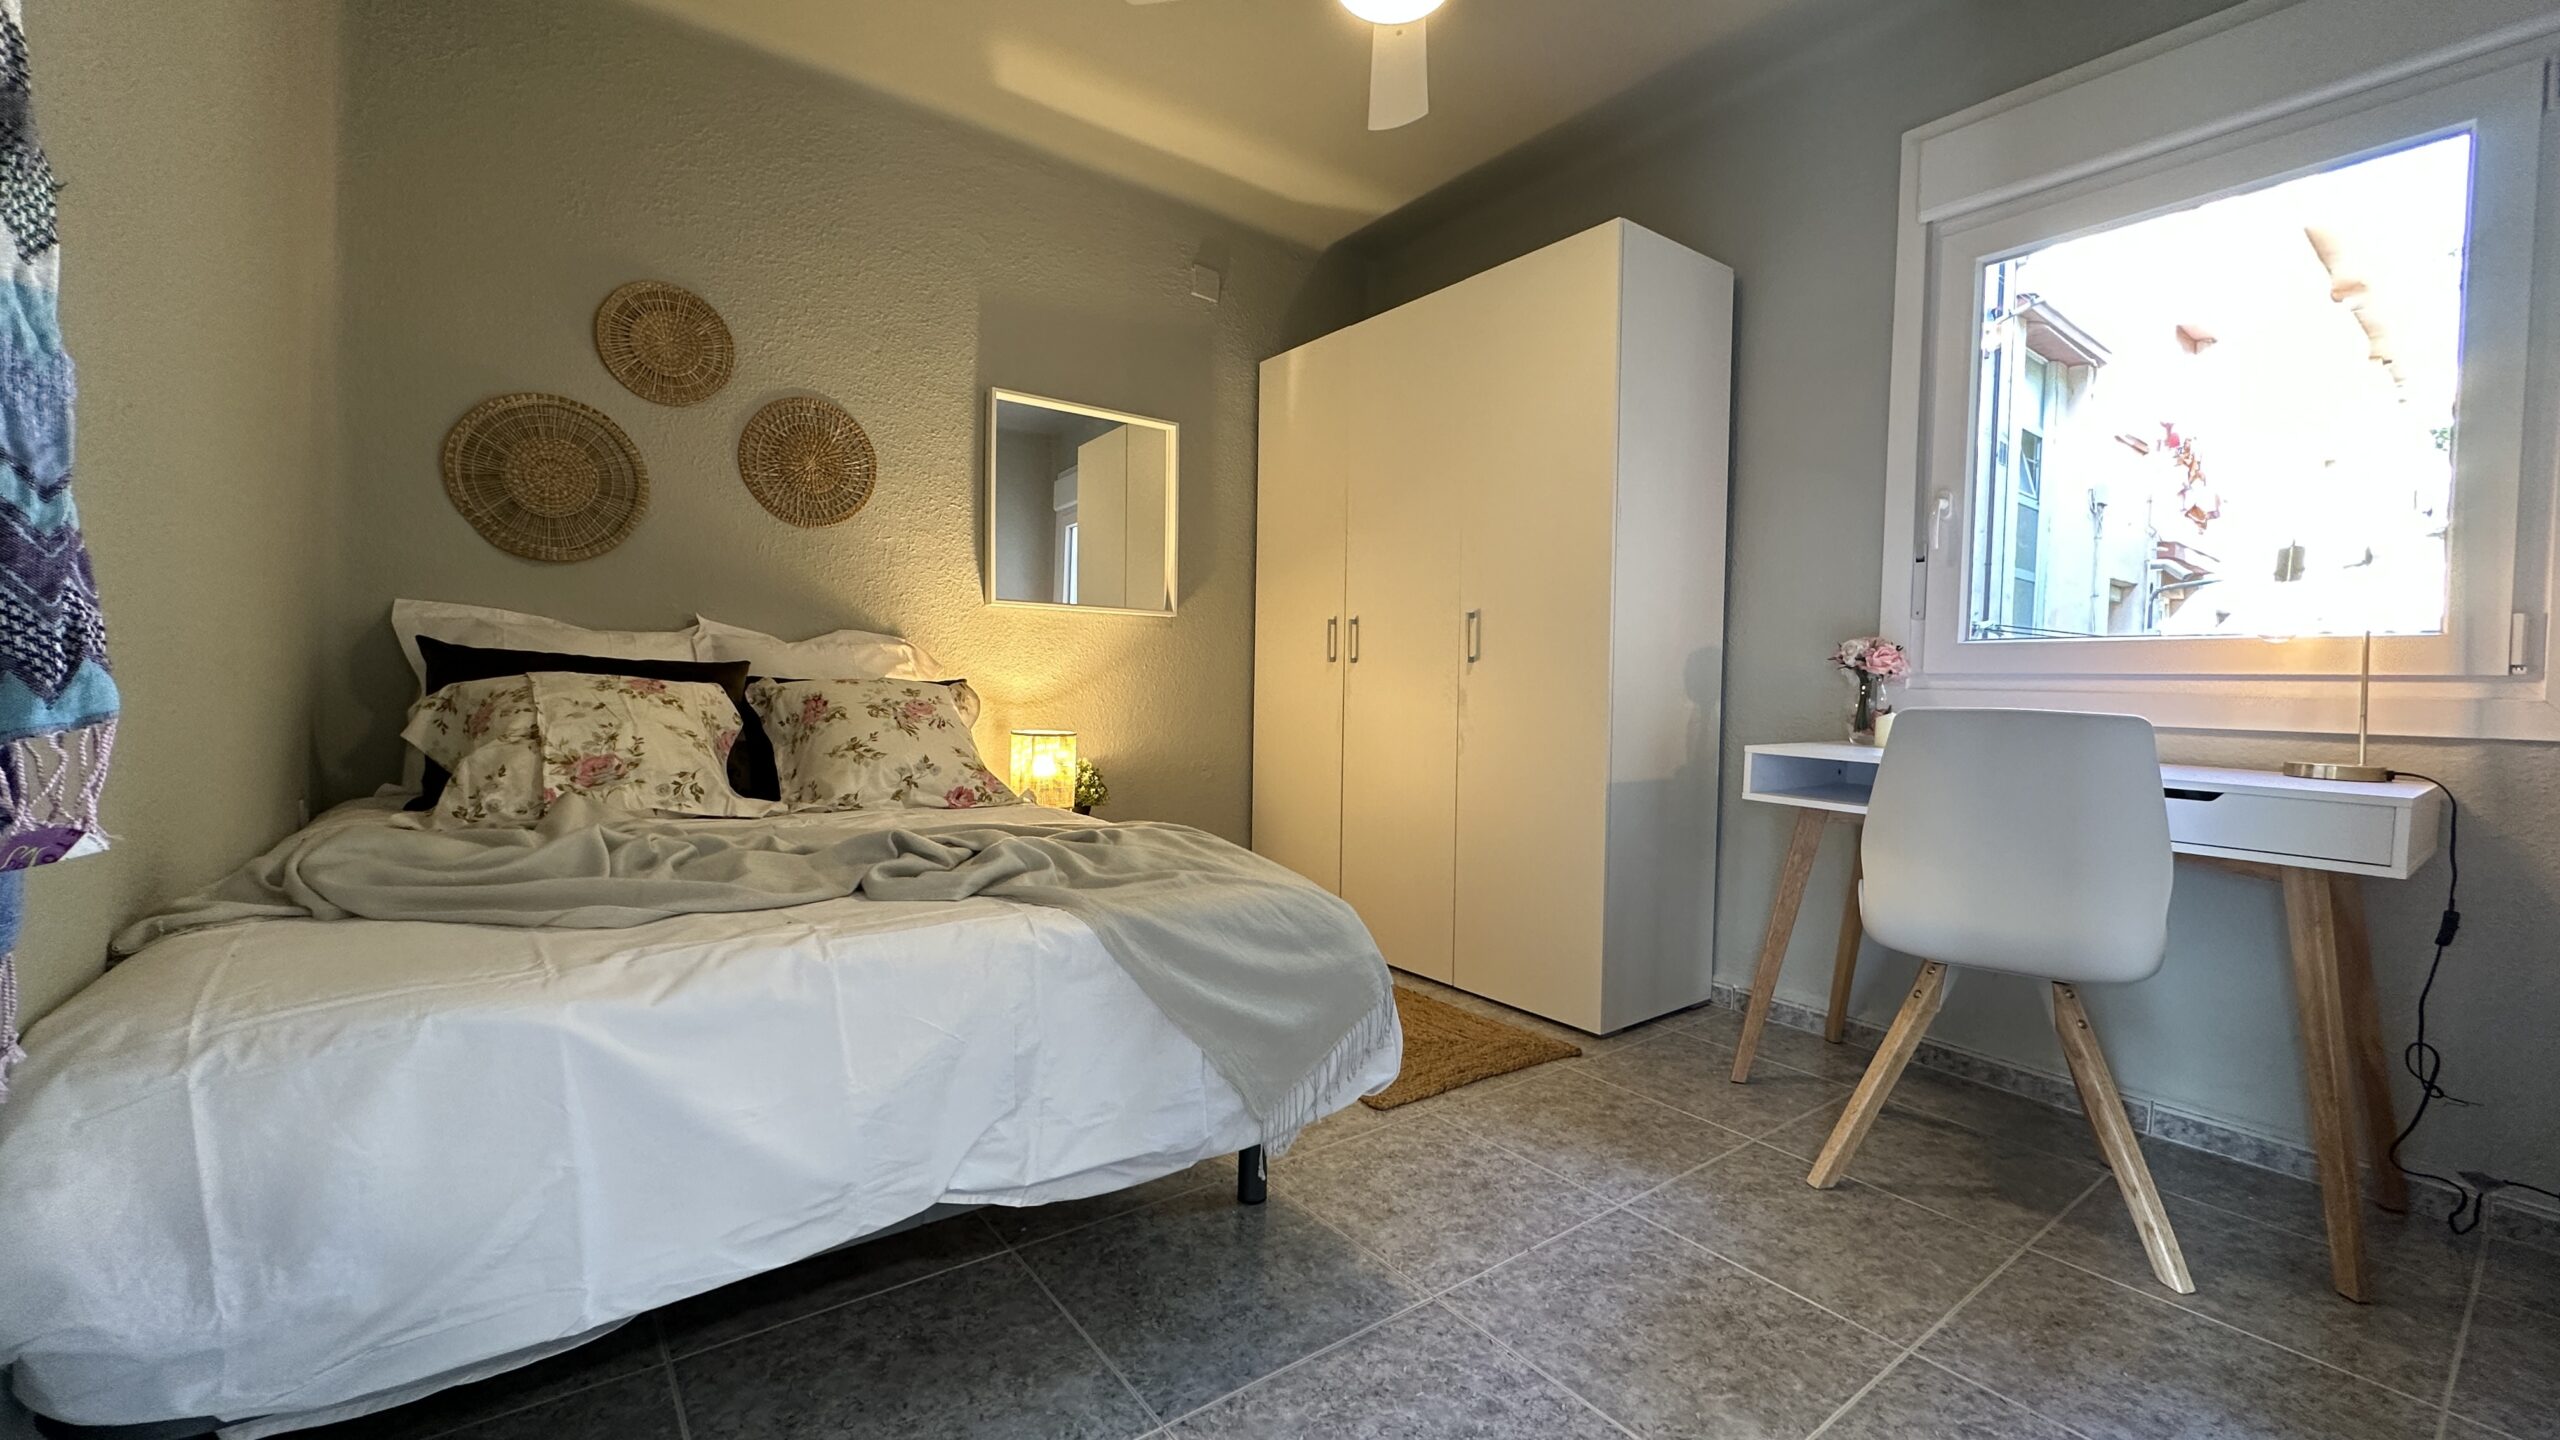 1017708. Brand new student apartment in Sabadell. Centrally located, 4 minutes walk from the Catalan railroads, station “Sabadell Nord”.